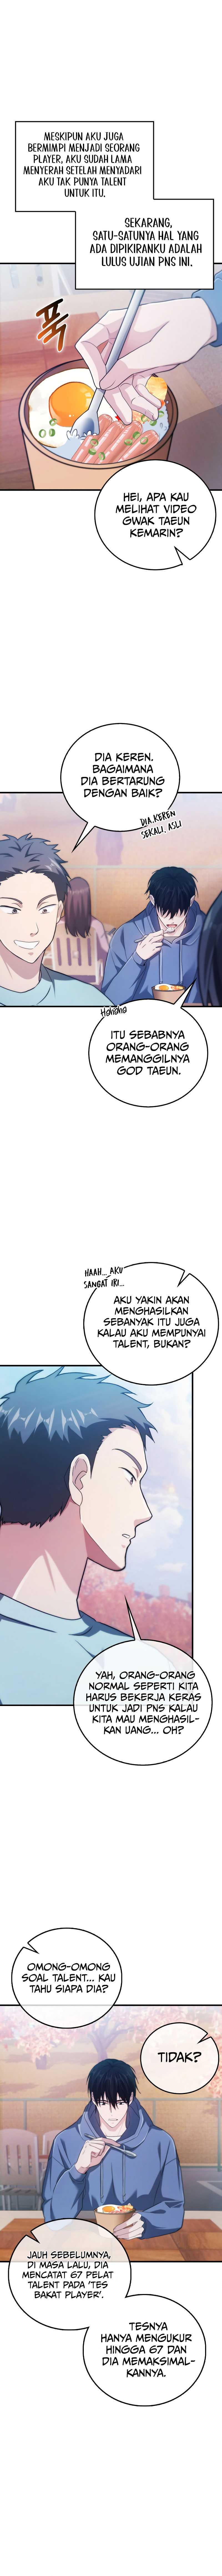 Max Talent Player Chapter 01